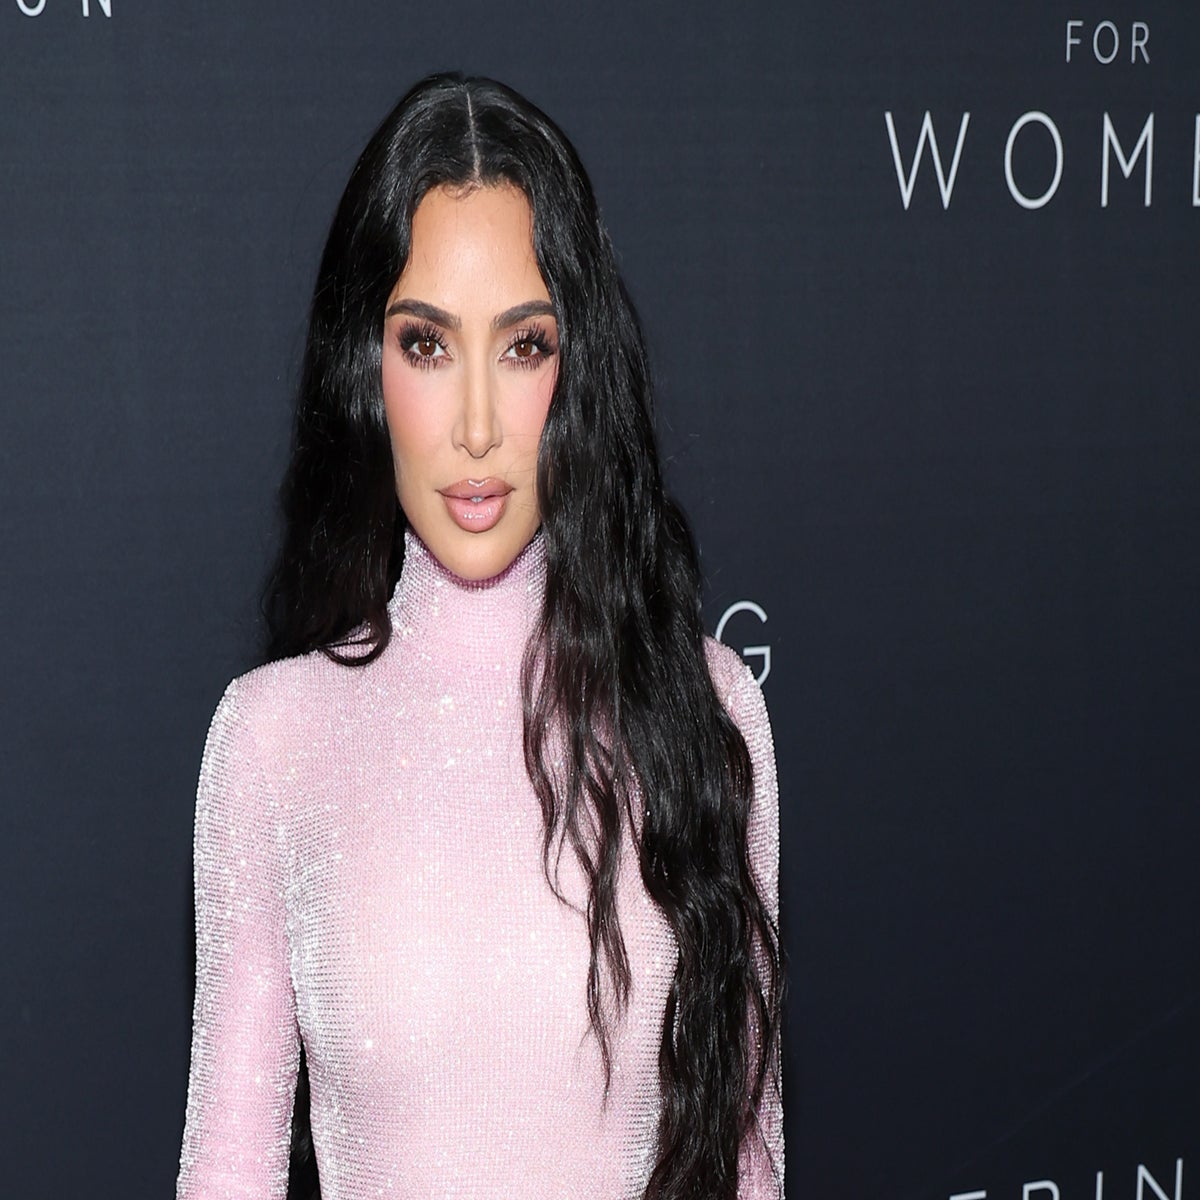 Update: Kim Kardashian's SKIMS Clothing Line Is Officially Worth